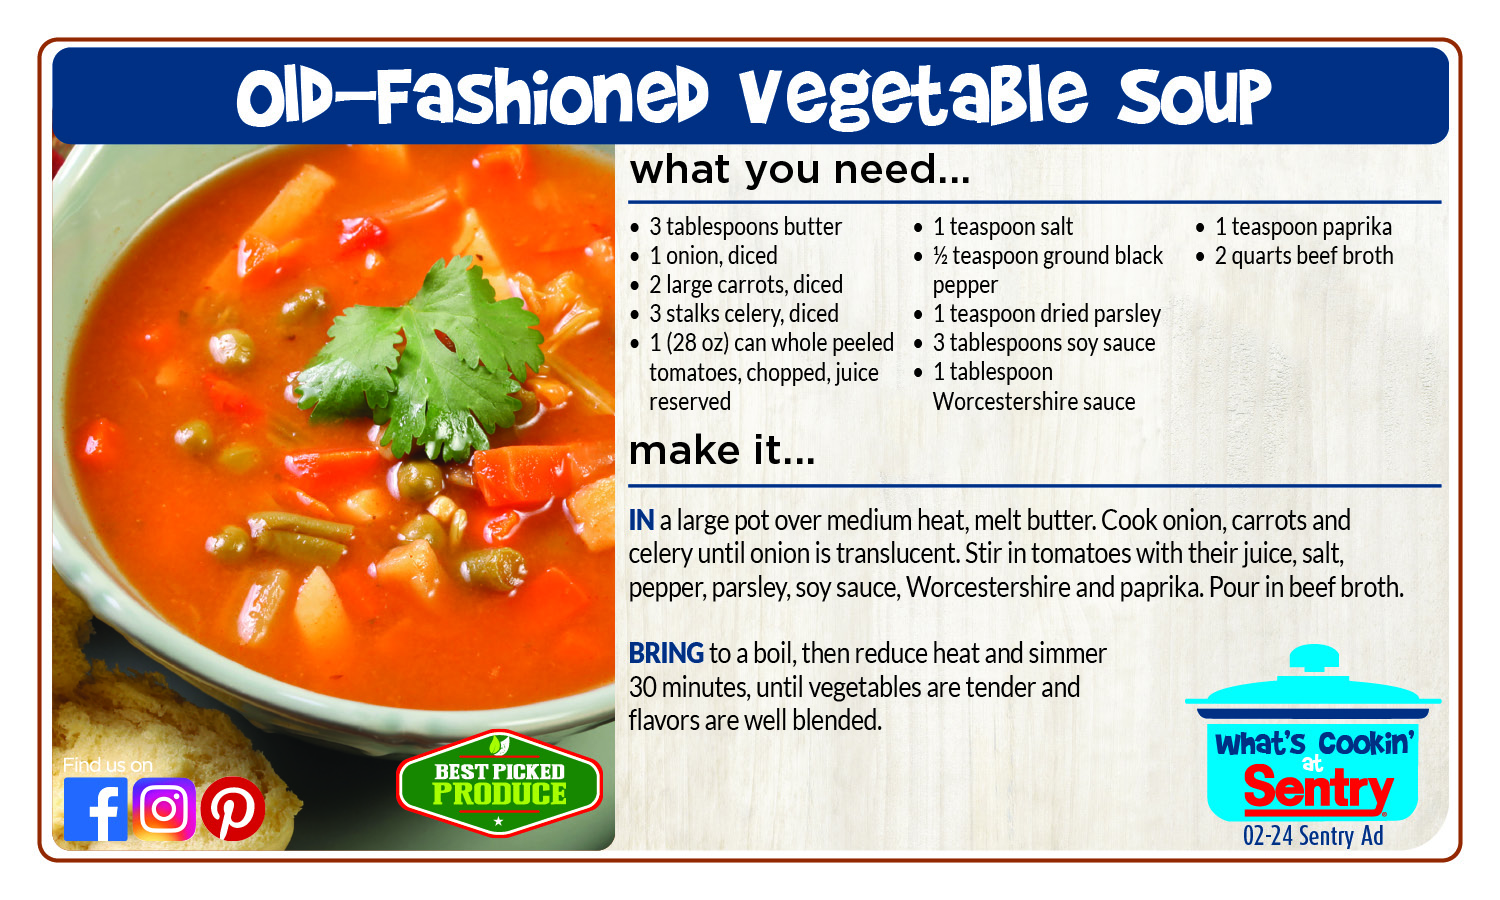 Recipe Card for Old-Fashioned Vegetable Soup